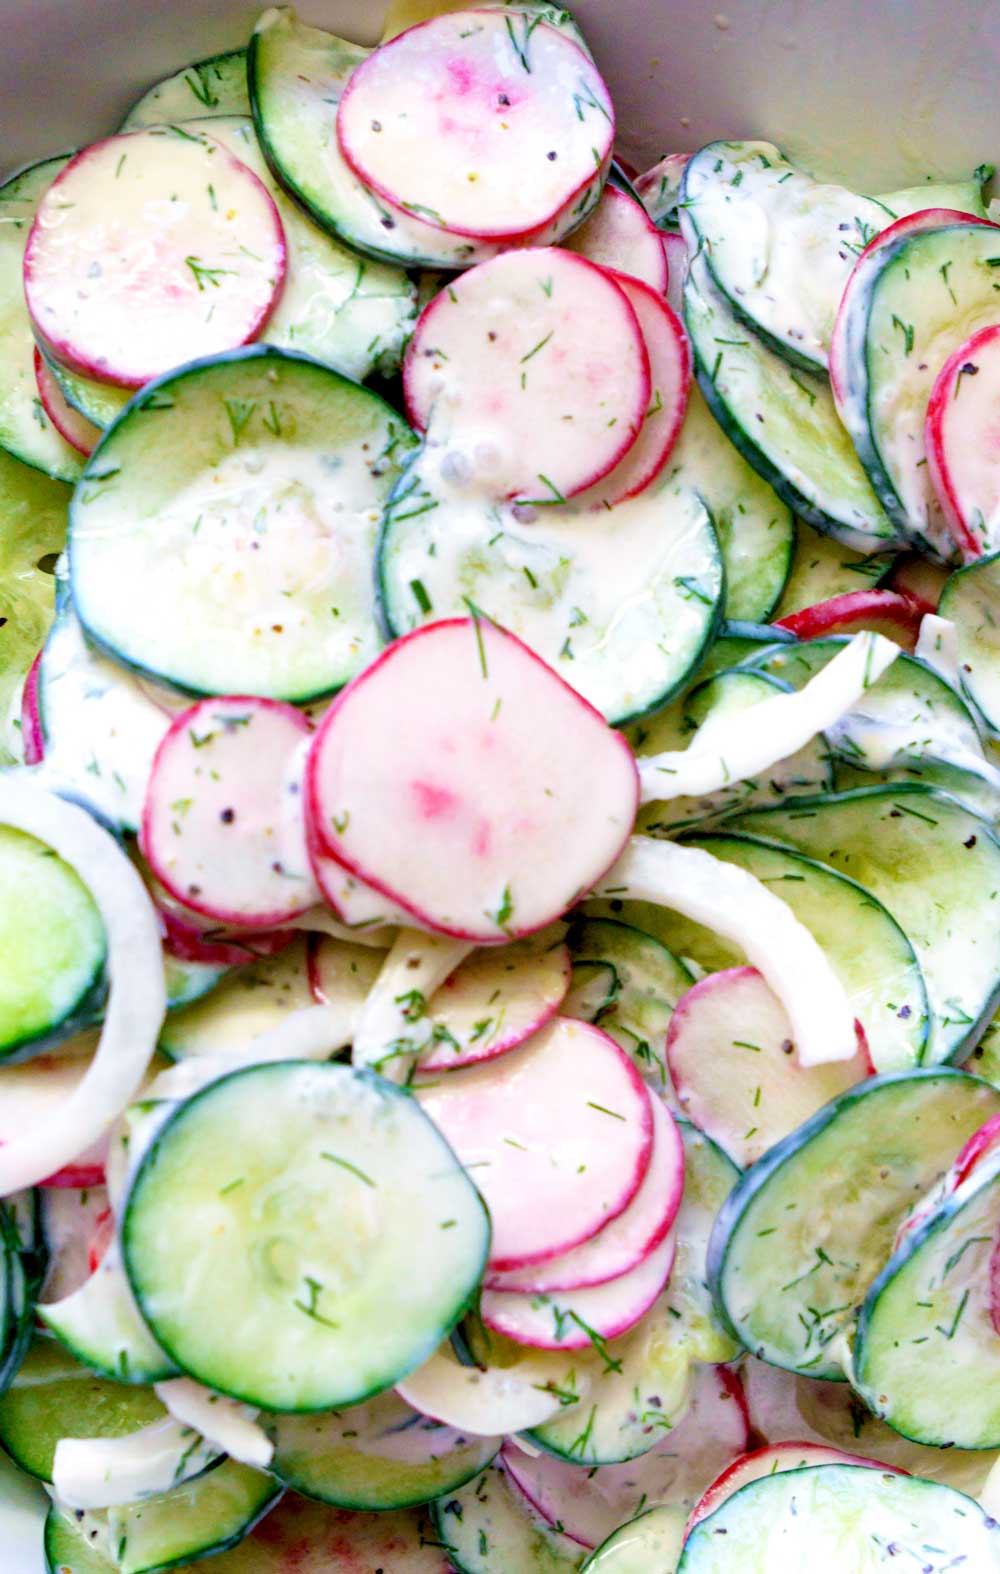 Delicious creamy cucumber salad that's super easy to make!